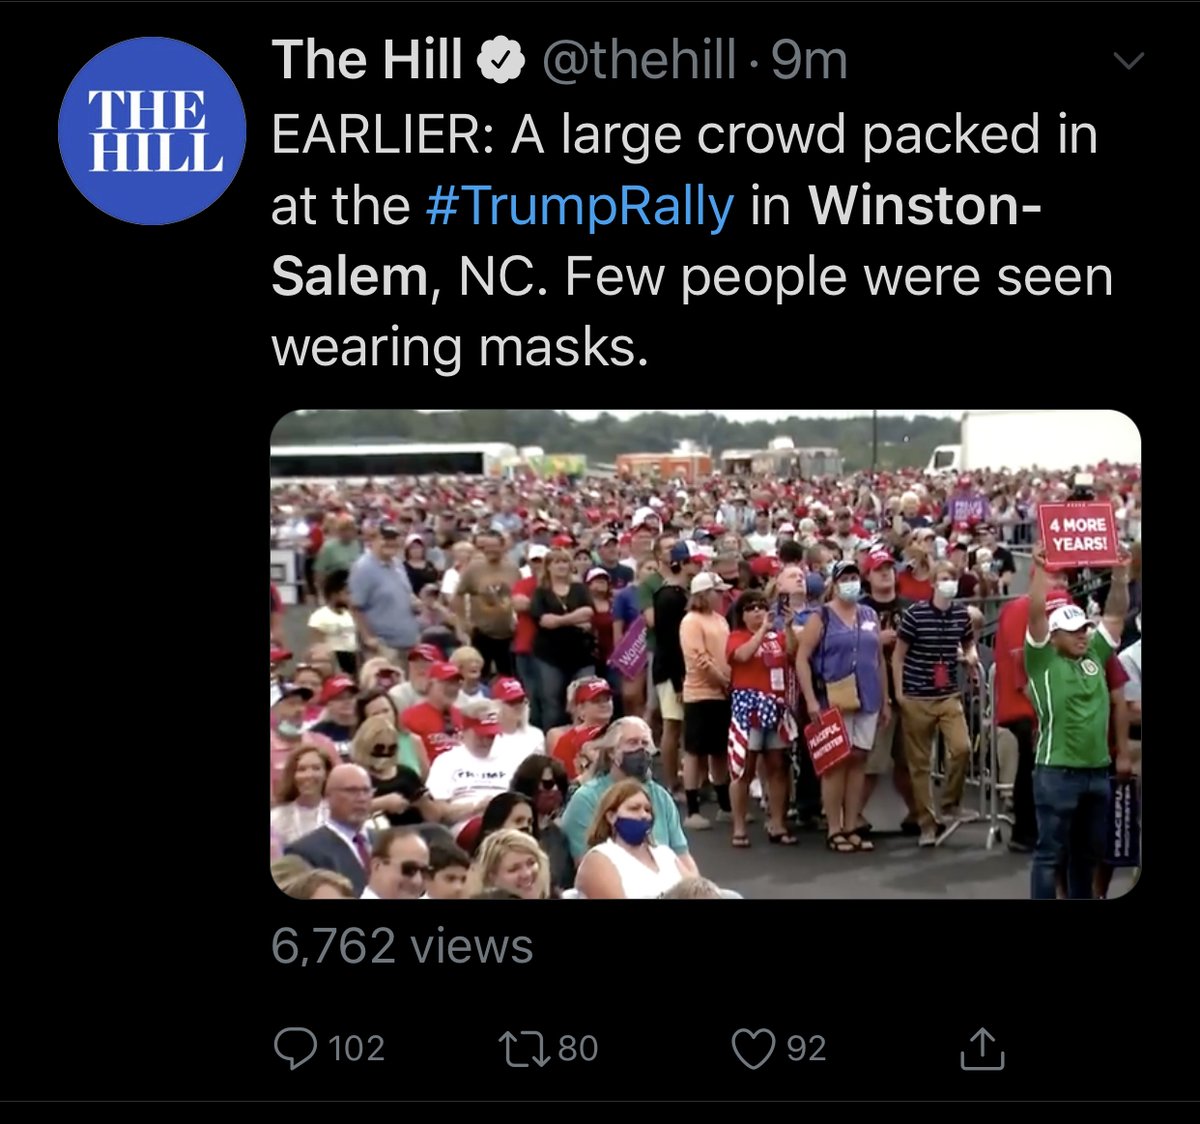 COVID is real and it's deadly serious, but it's not the boogeyman the left thinks it is. I believe the center/center-right see these photos and don't think "where are the masks?!?!?" I think the first thought is likely: "wow, that's a lot of people supporting Trump."16/22